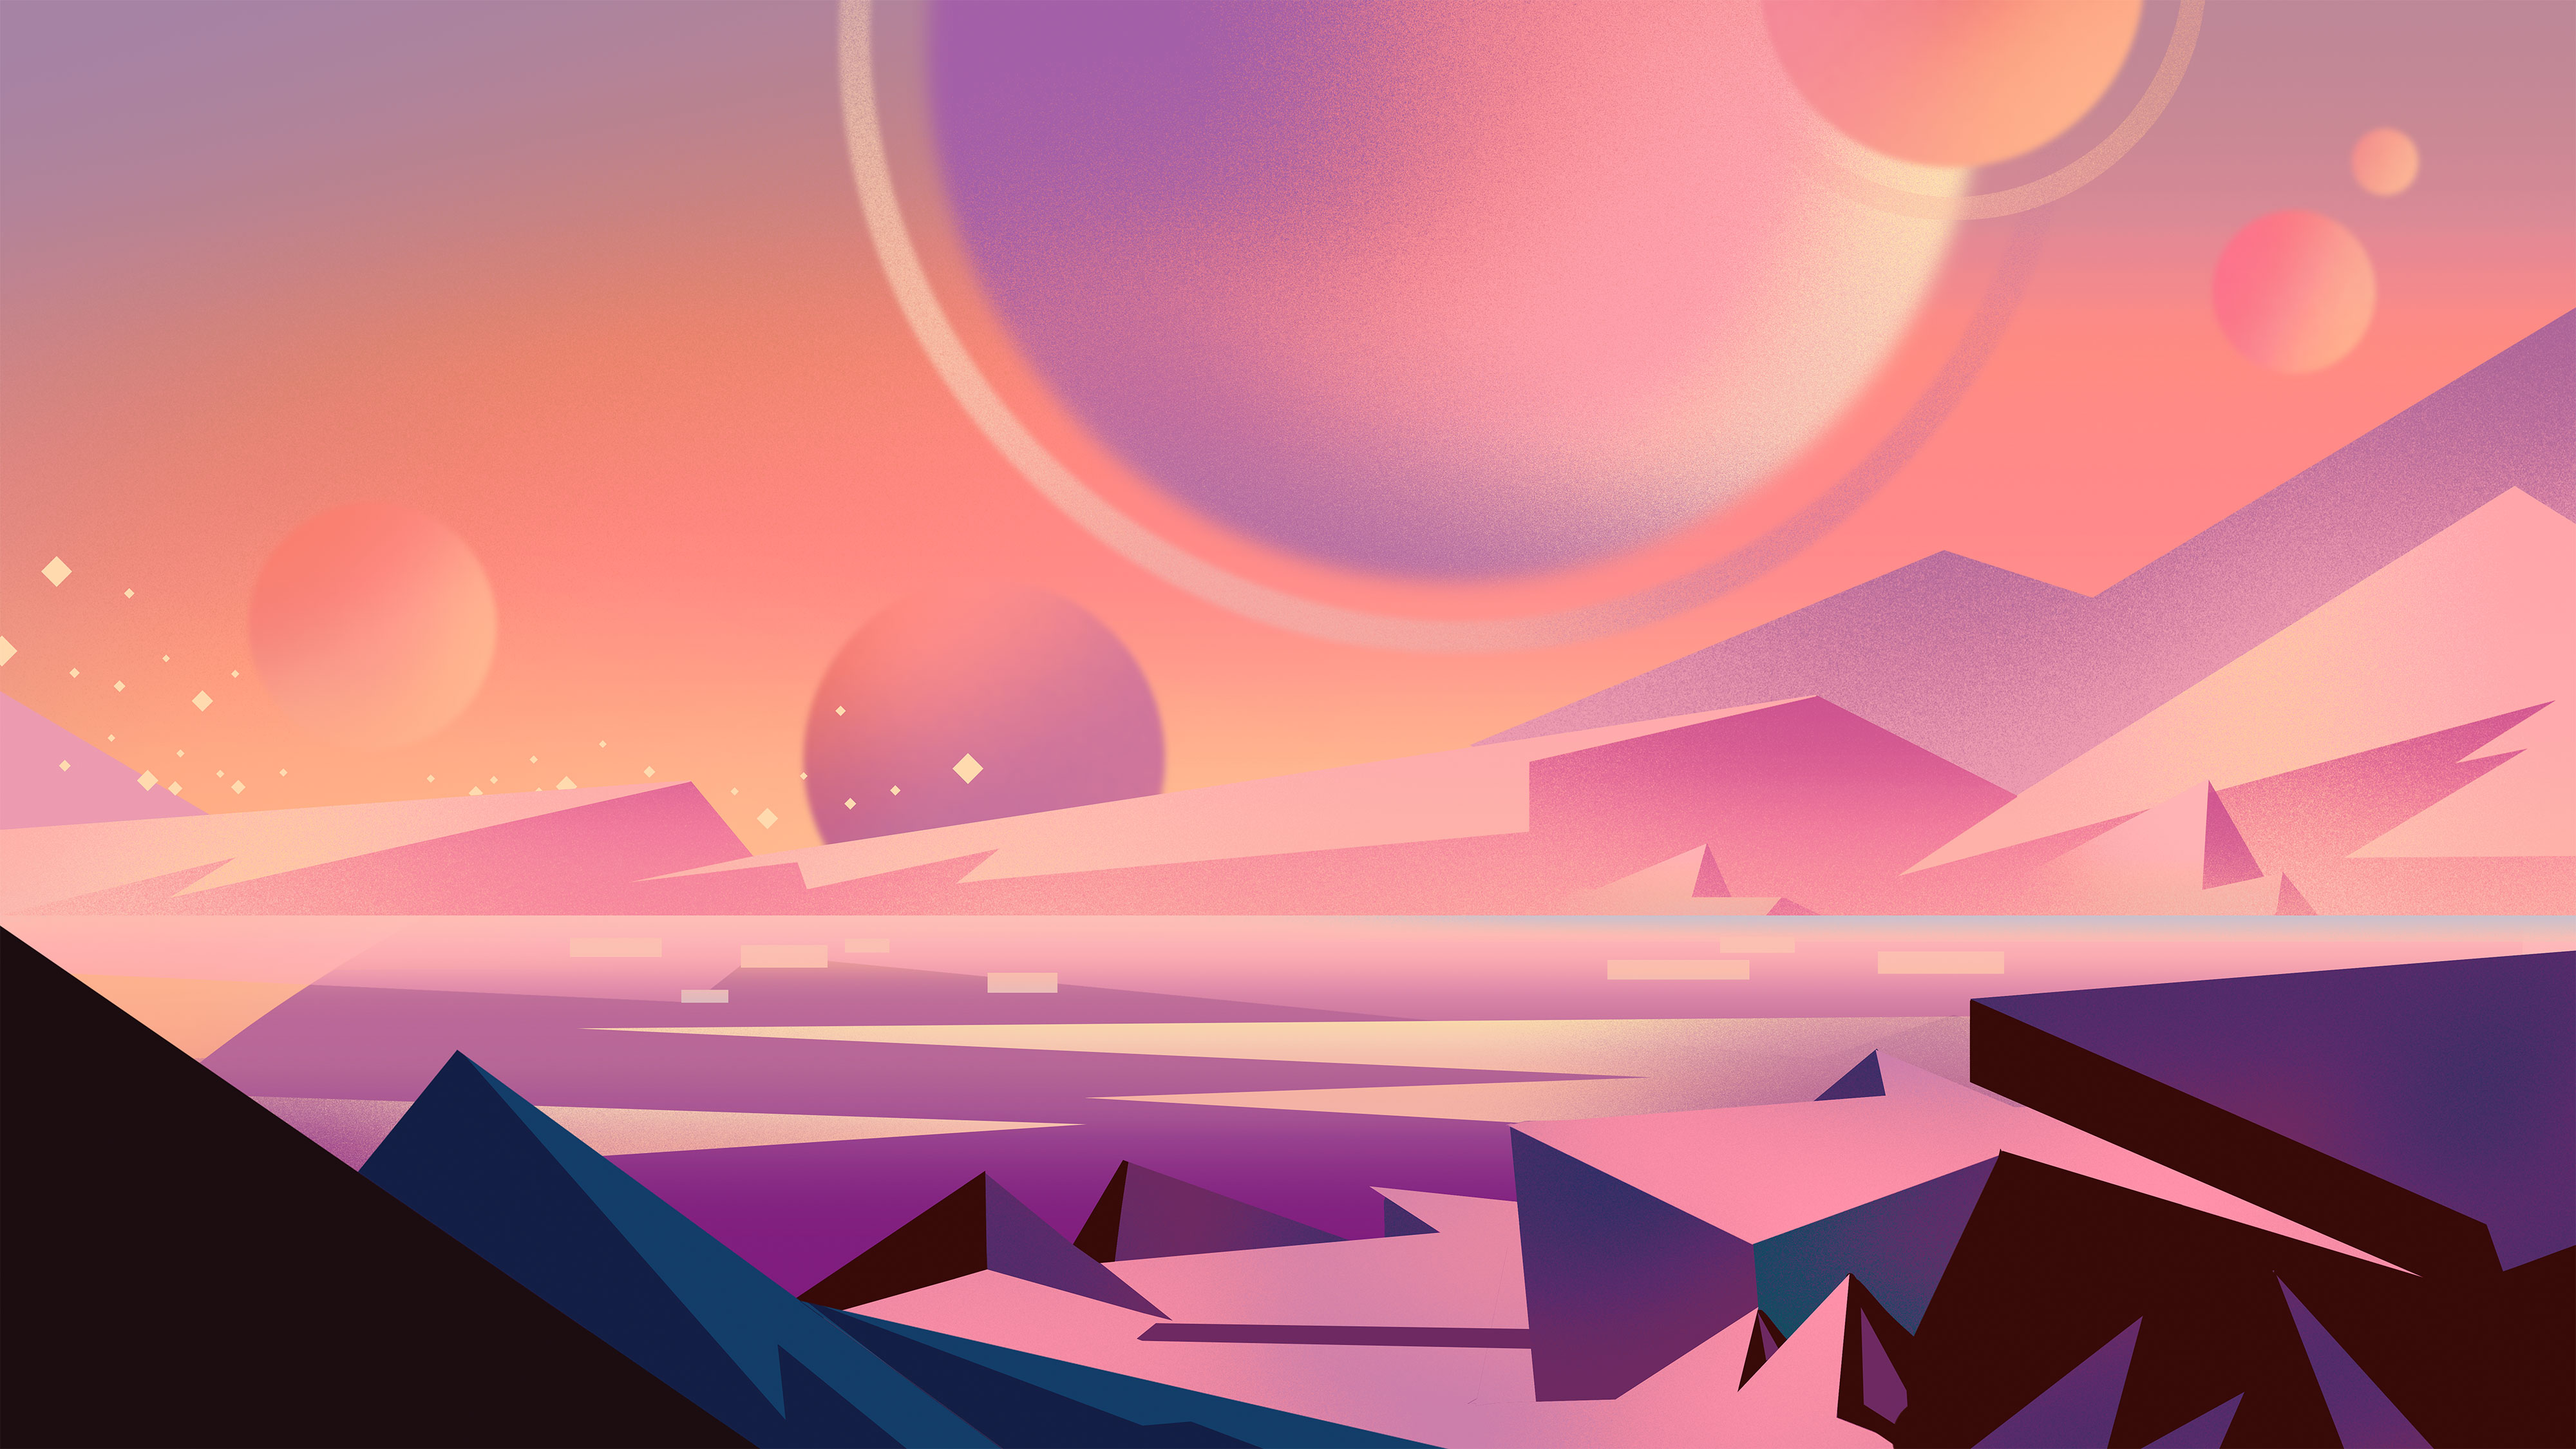 slide 5 - The surface of the rocky, terrestrial exoplanet Trappist-1e is depicted in shades of blue and purple and in a bold, cartoon style. Other planets from the Trappist system can be seen in the night sky and the landscape is a mix of small mountains, rocks, and some blue spots that allude to the possibility that there could be water on the planet's surface. 